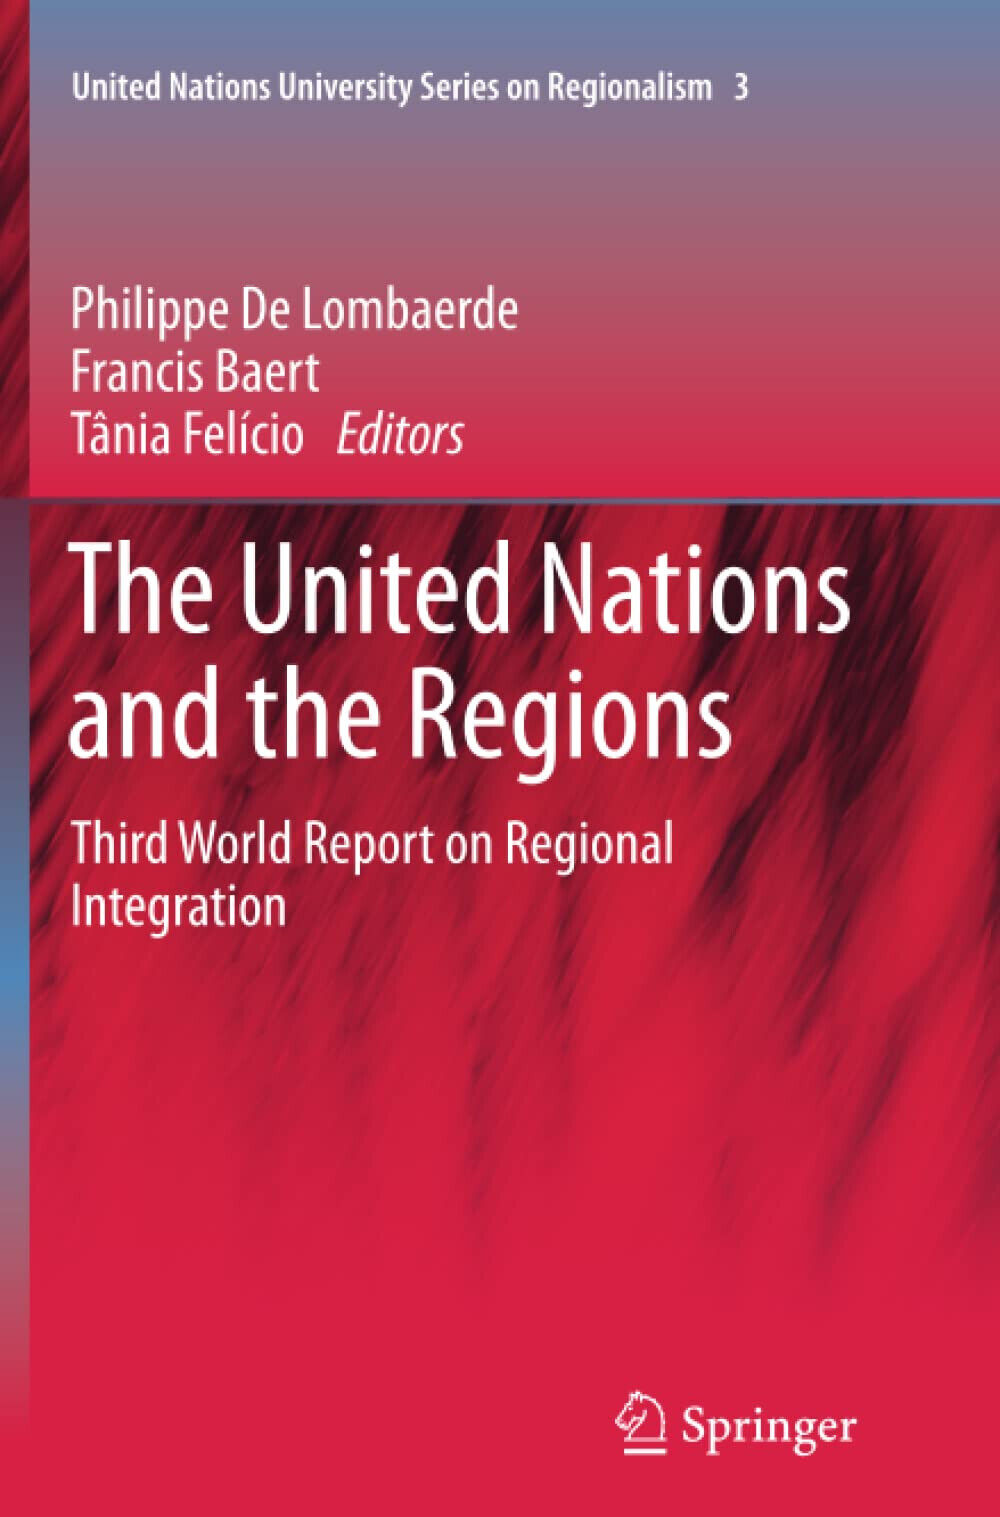 The United Nations and the Regions - Philippe Lombaerde - Springer, 2014